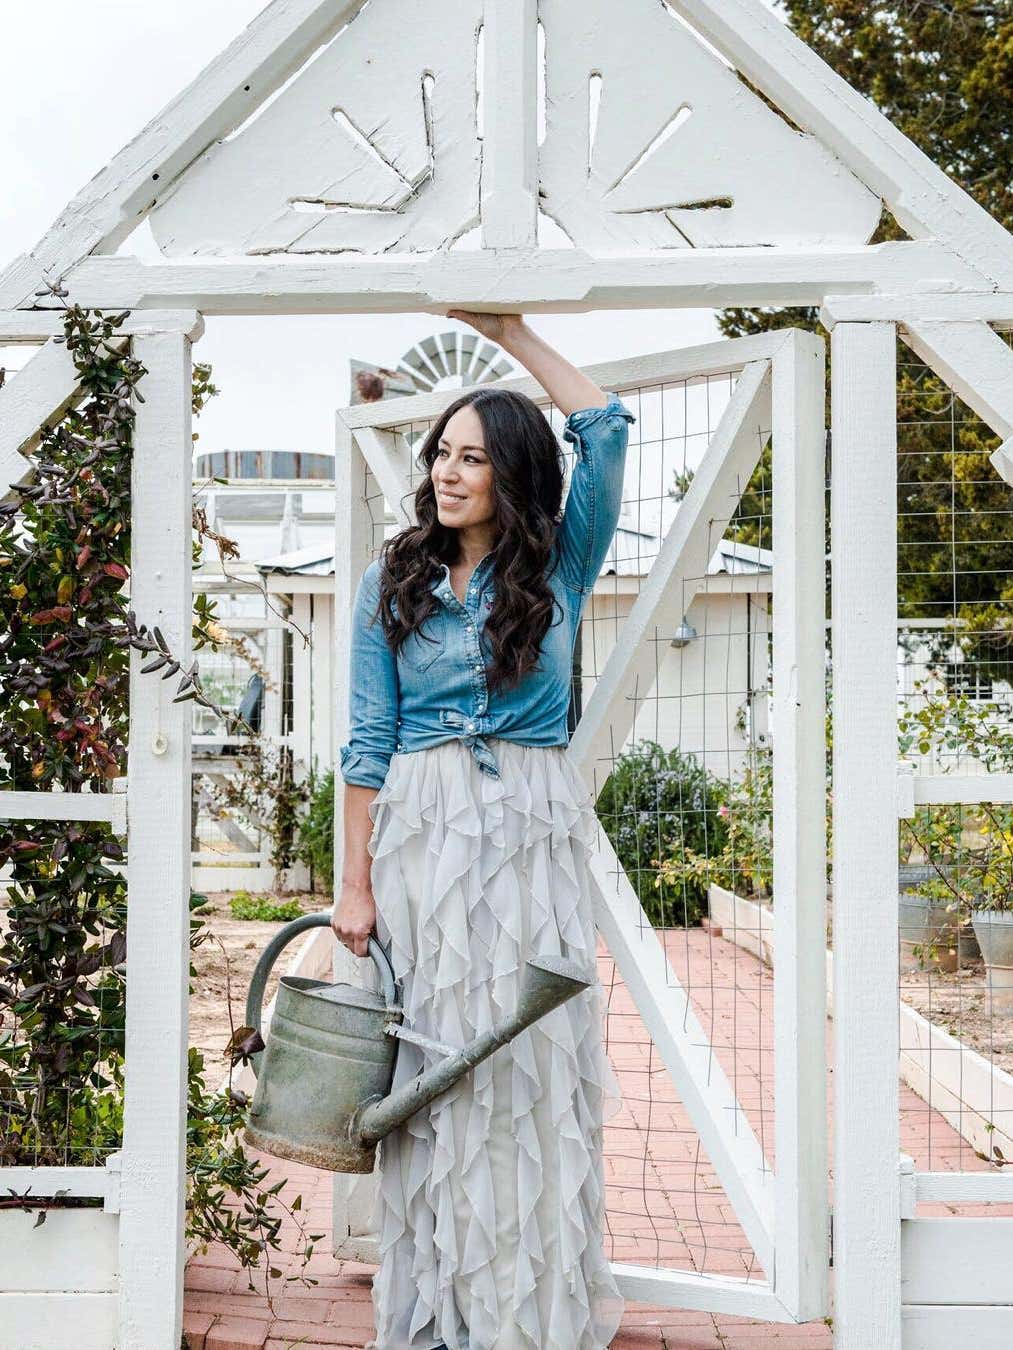 Joanna Gaines Might Be Coming to an Anthropologie Near You